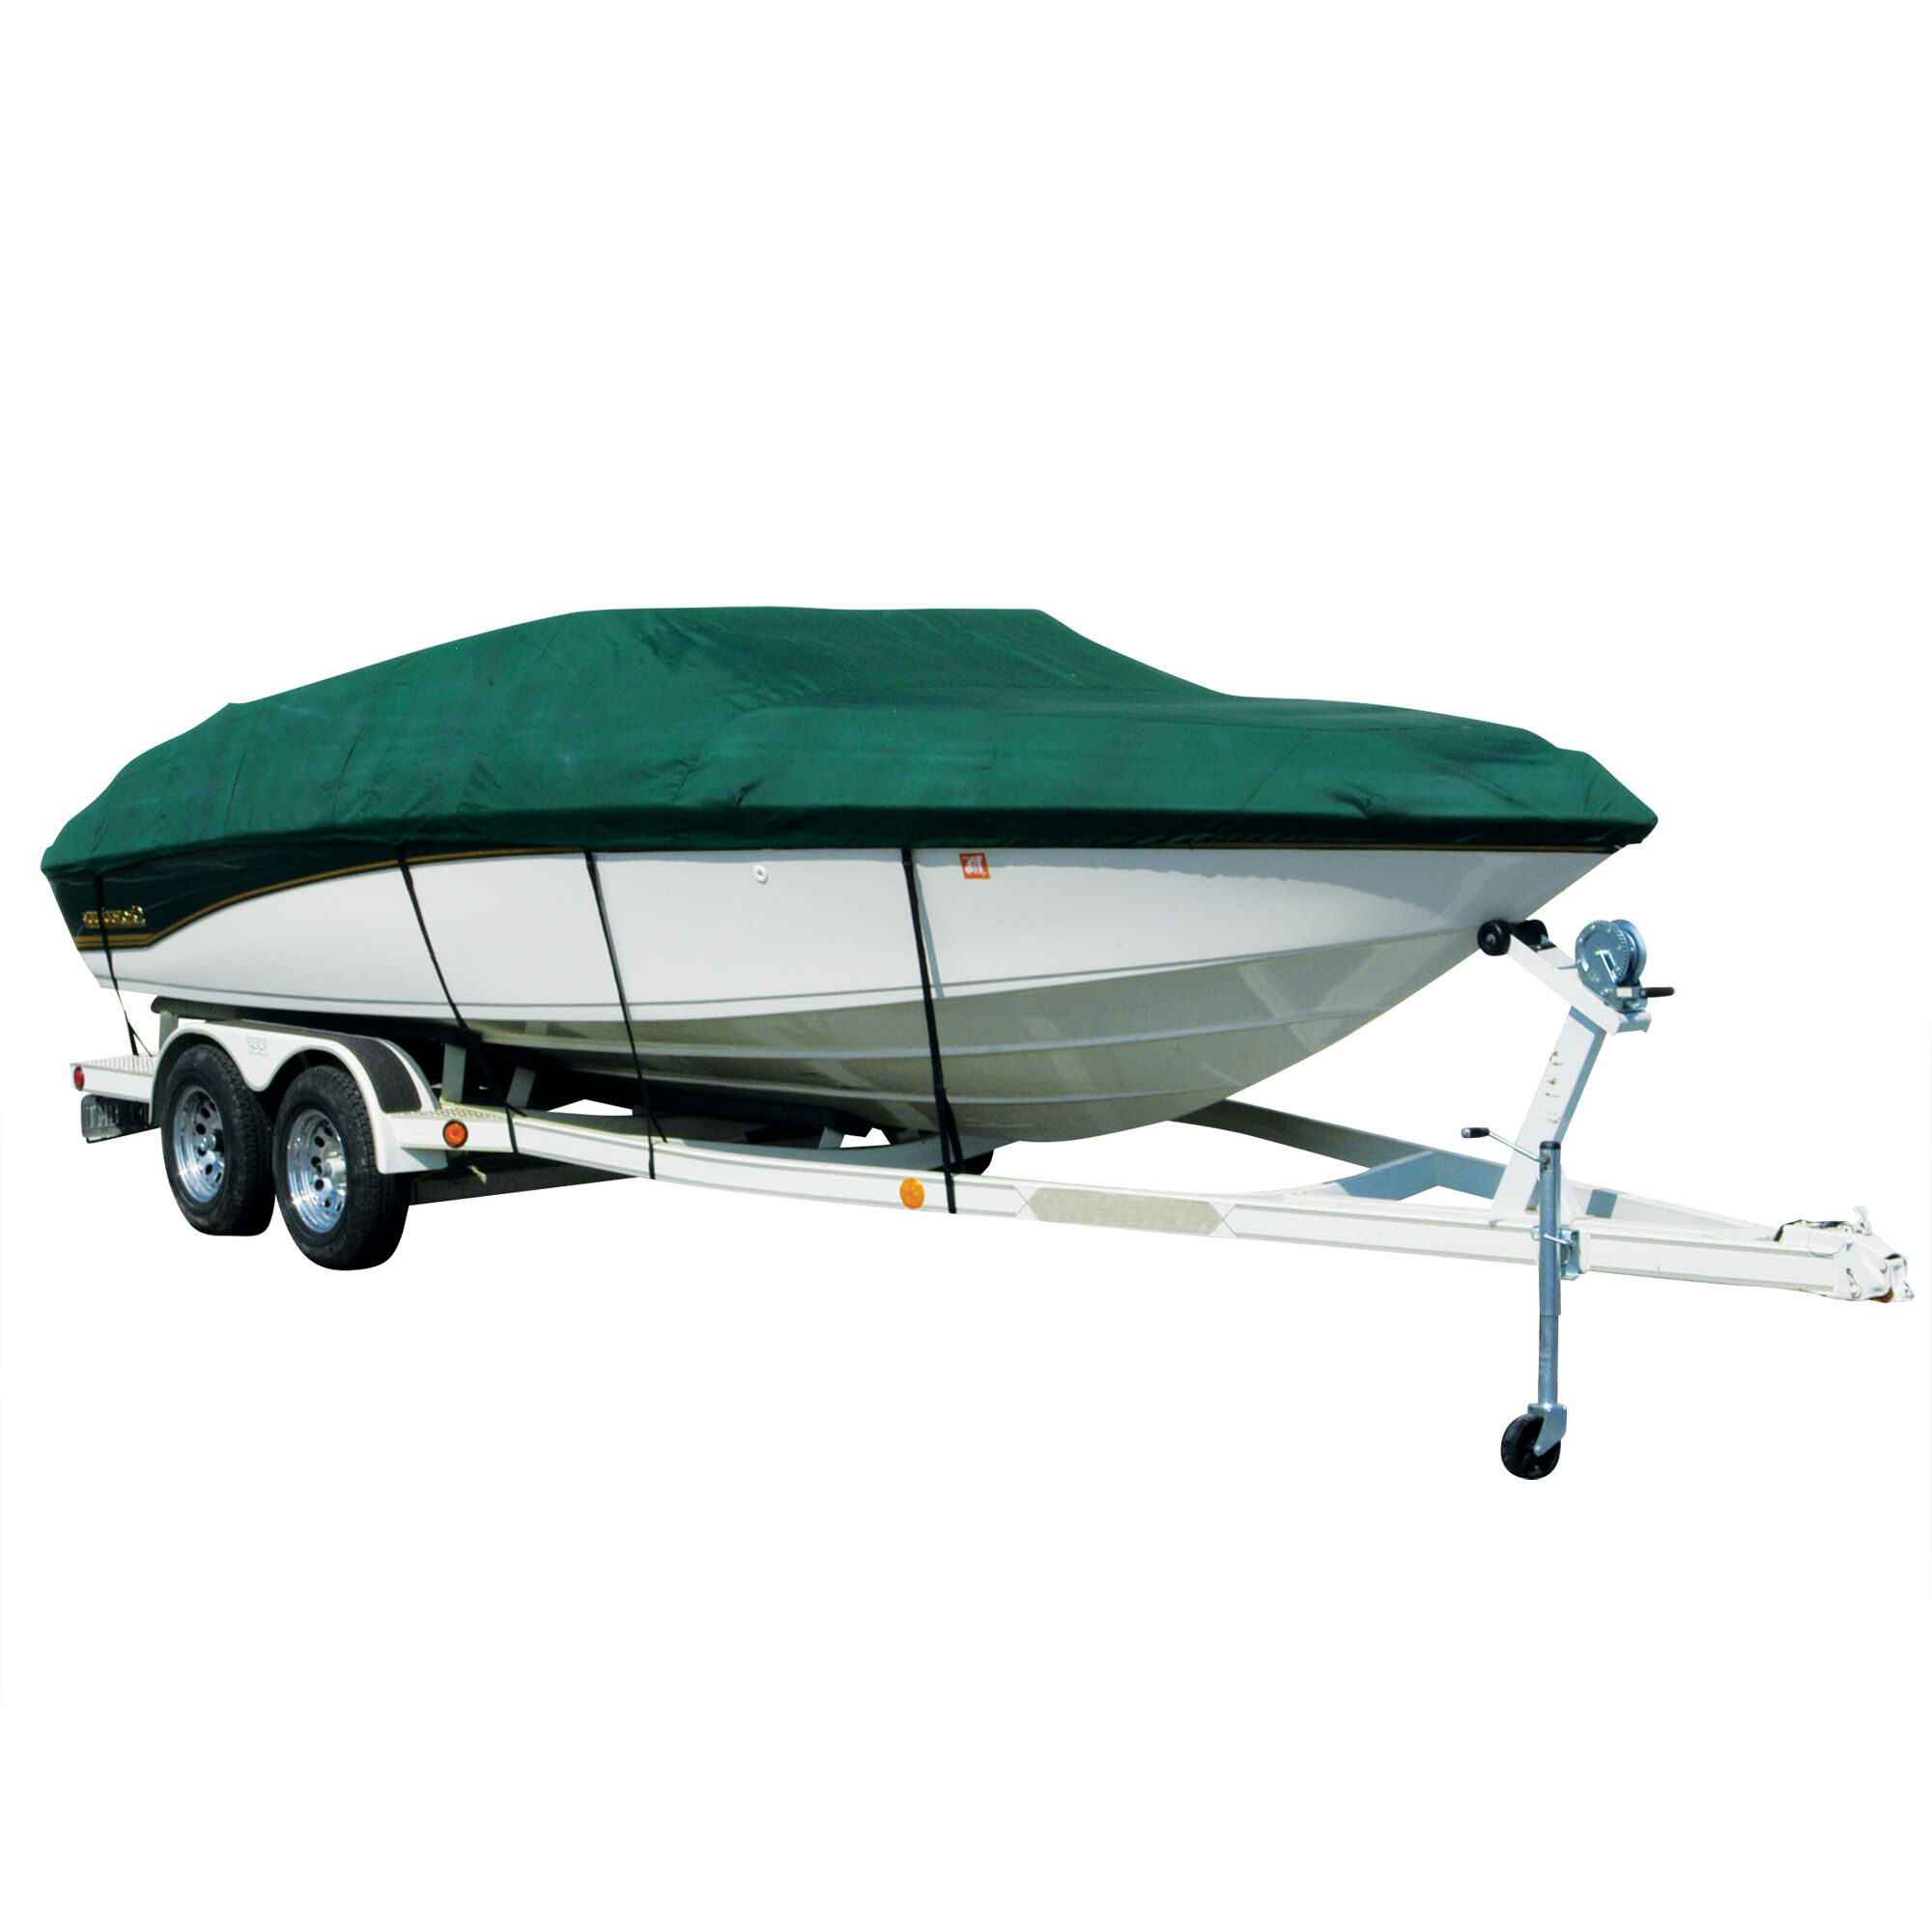 Covermate Exact Fit Sharkskin Boat Cover For Supreme 19 Cs Does Not Cover PLATFORMm in Forest Green